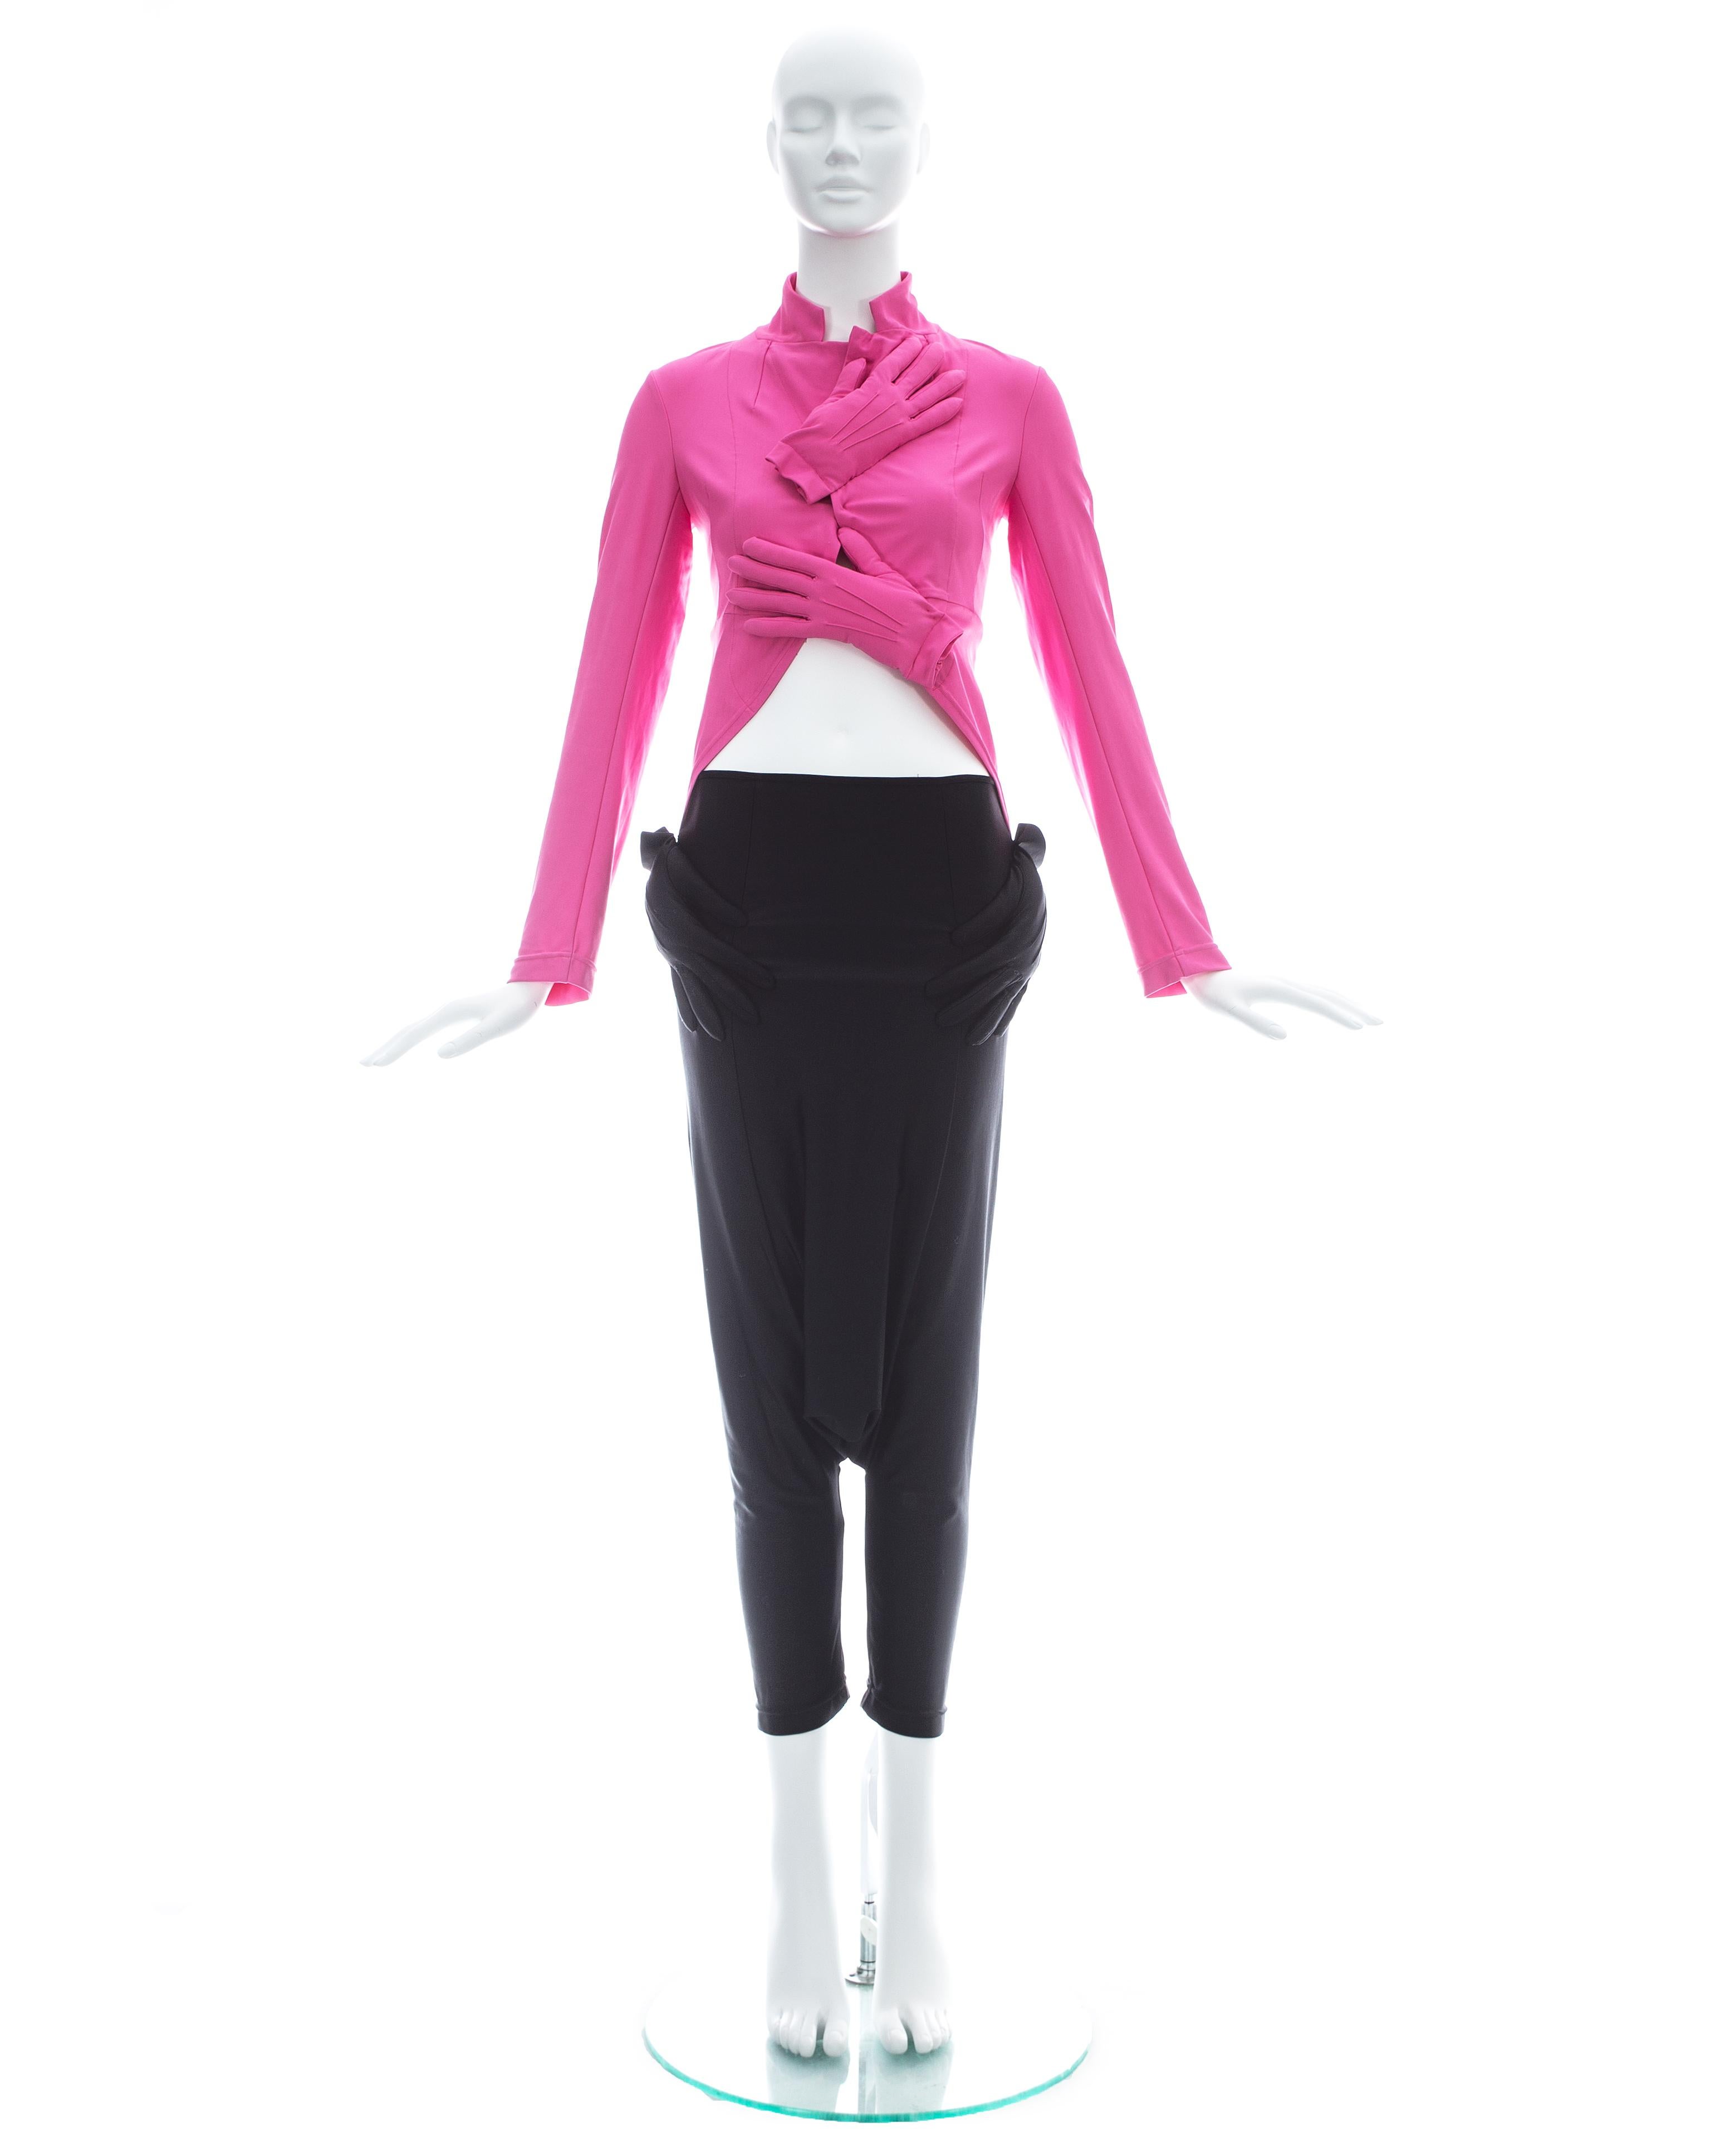 Comme des Garcons; hot pink lycra fitted jacket matched with a pair of black lycra harem pants; both with attached padded gloves

Fall-Winter 2007